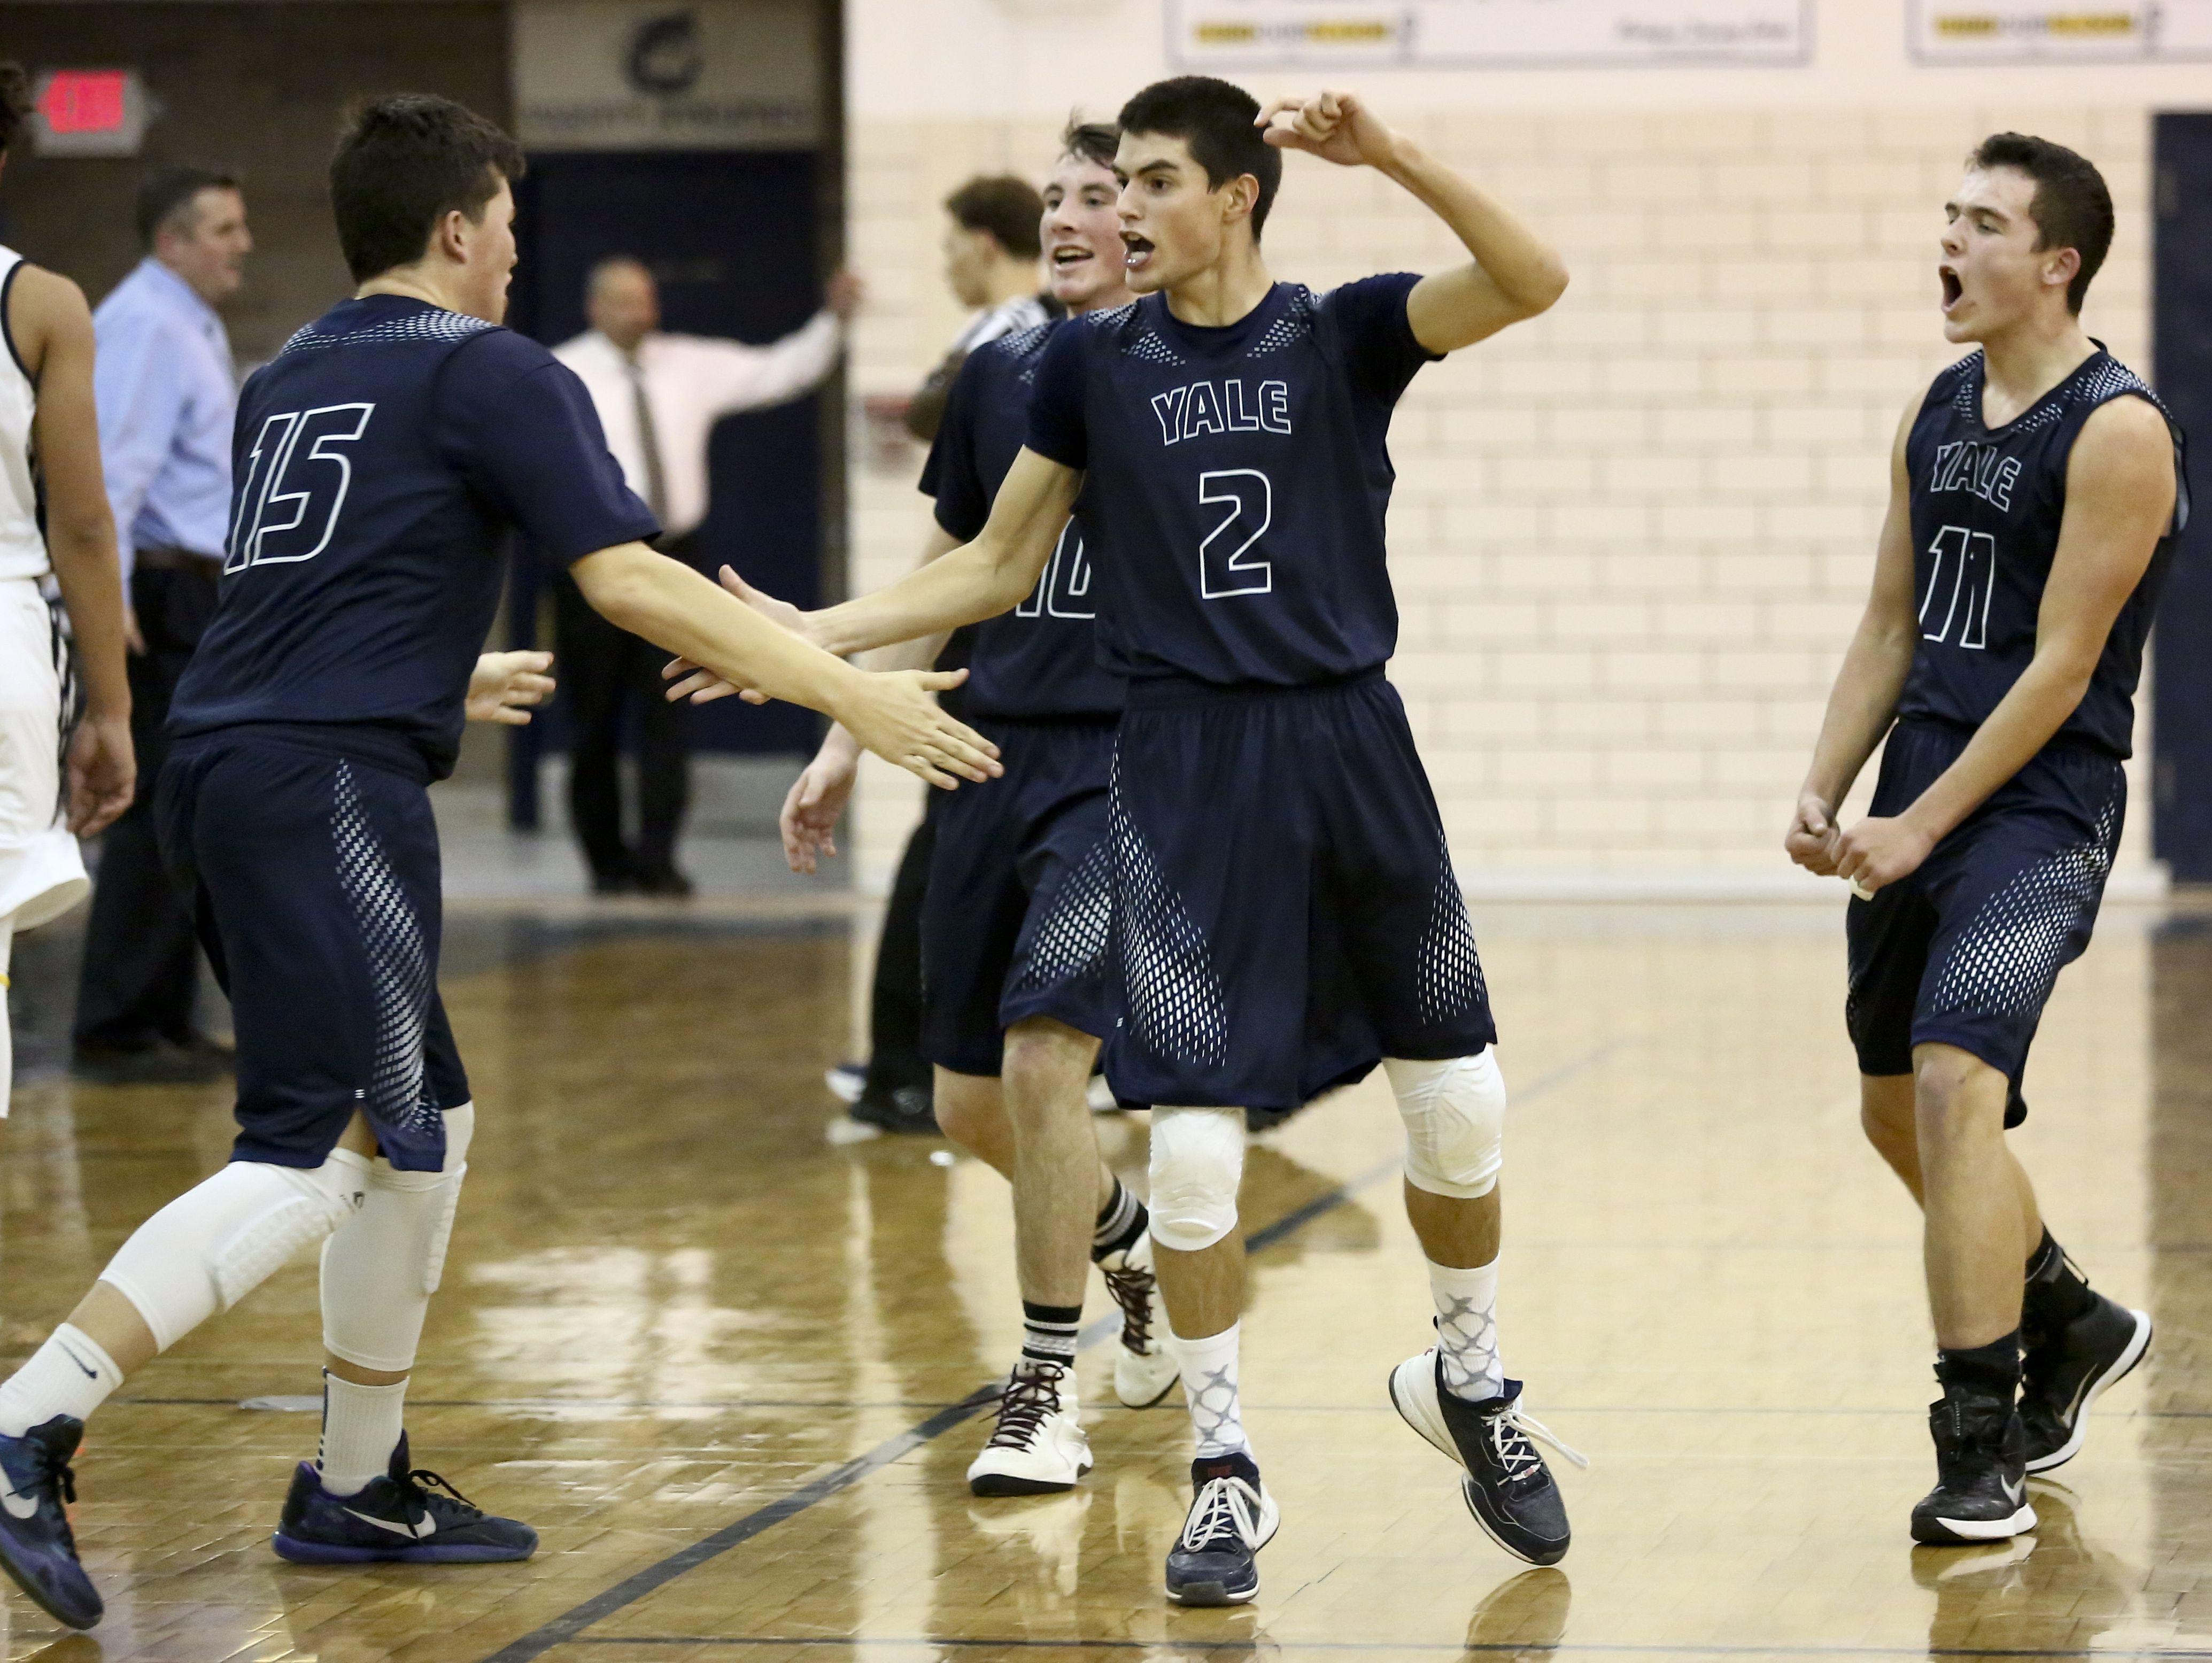 Yale junior Matthew Donnellon, left, sophomore Blake Pilgrim and sophomore Derik Porrett celebrate after scoring streak led to a Northern time out during a basketball game Tuesday, Jan. 5, 2016 at Port Huron Northern High School.